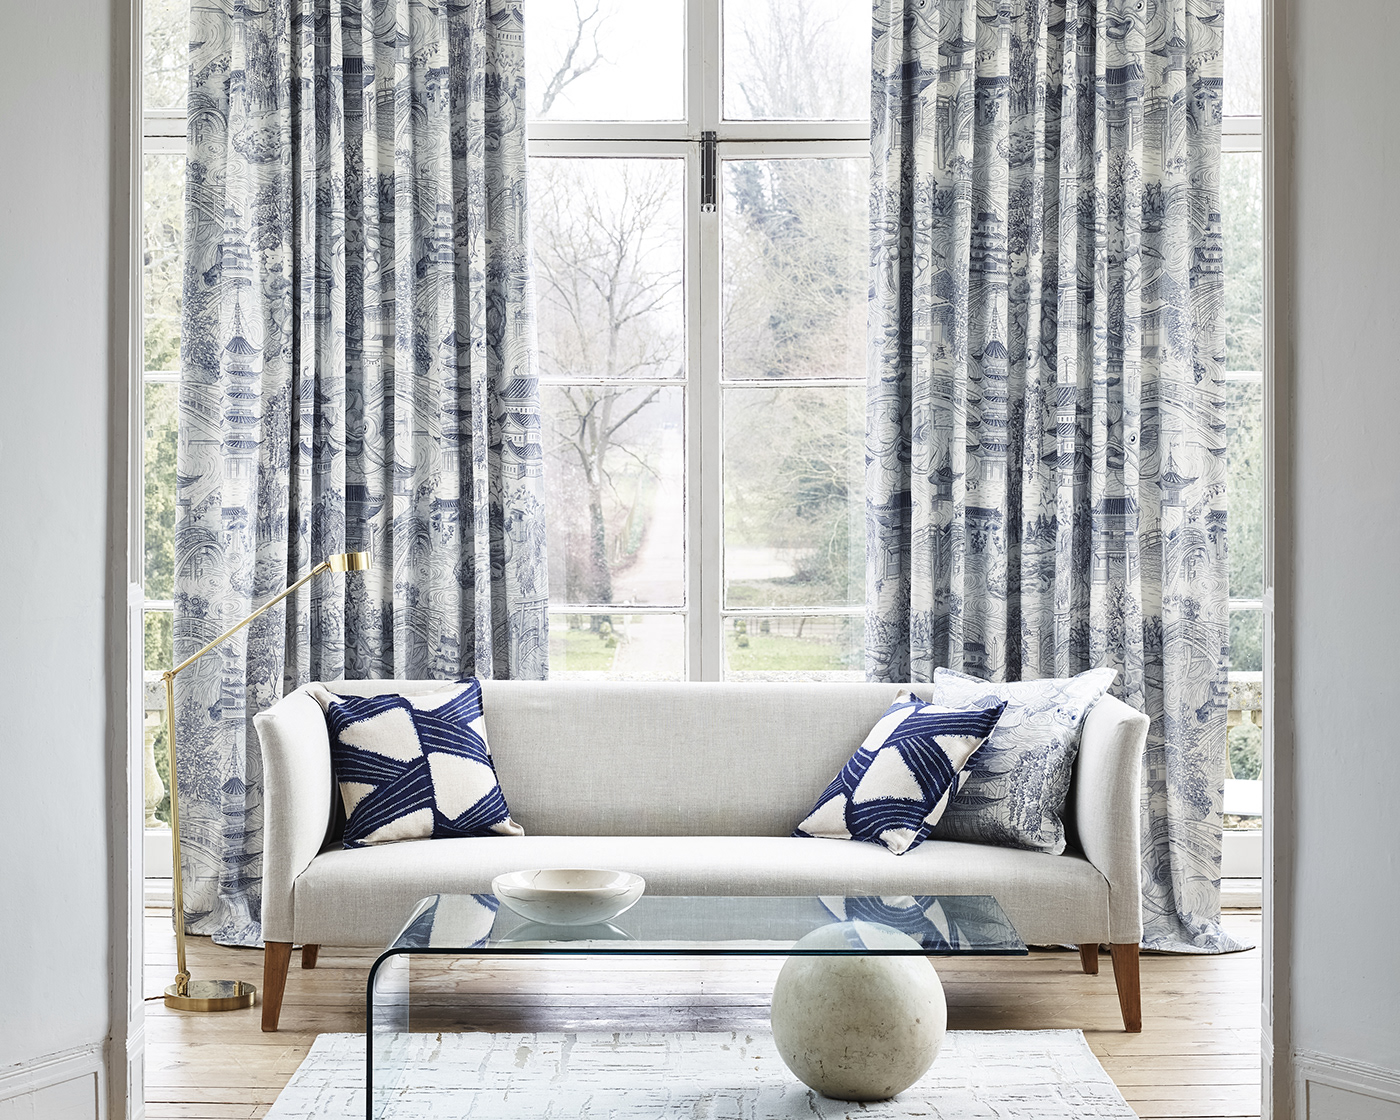 Staged interiors photograph by the Sanderson Design Group showing illustrative patterned curtains.